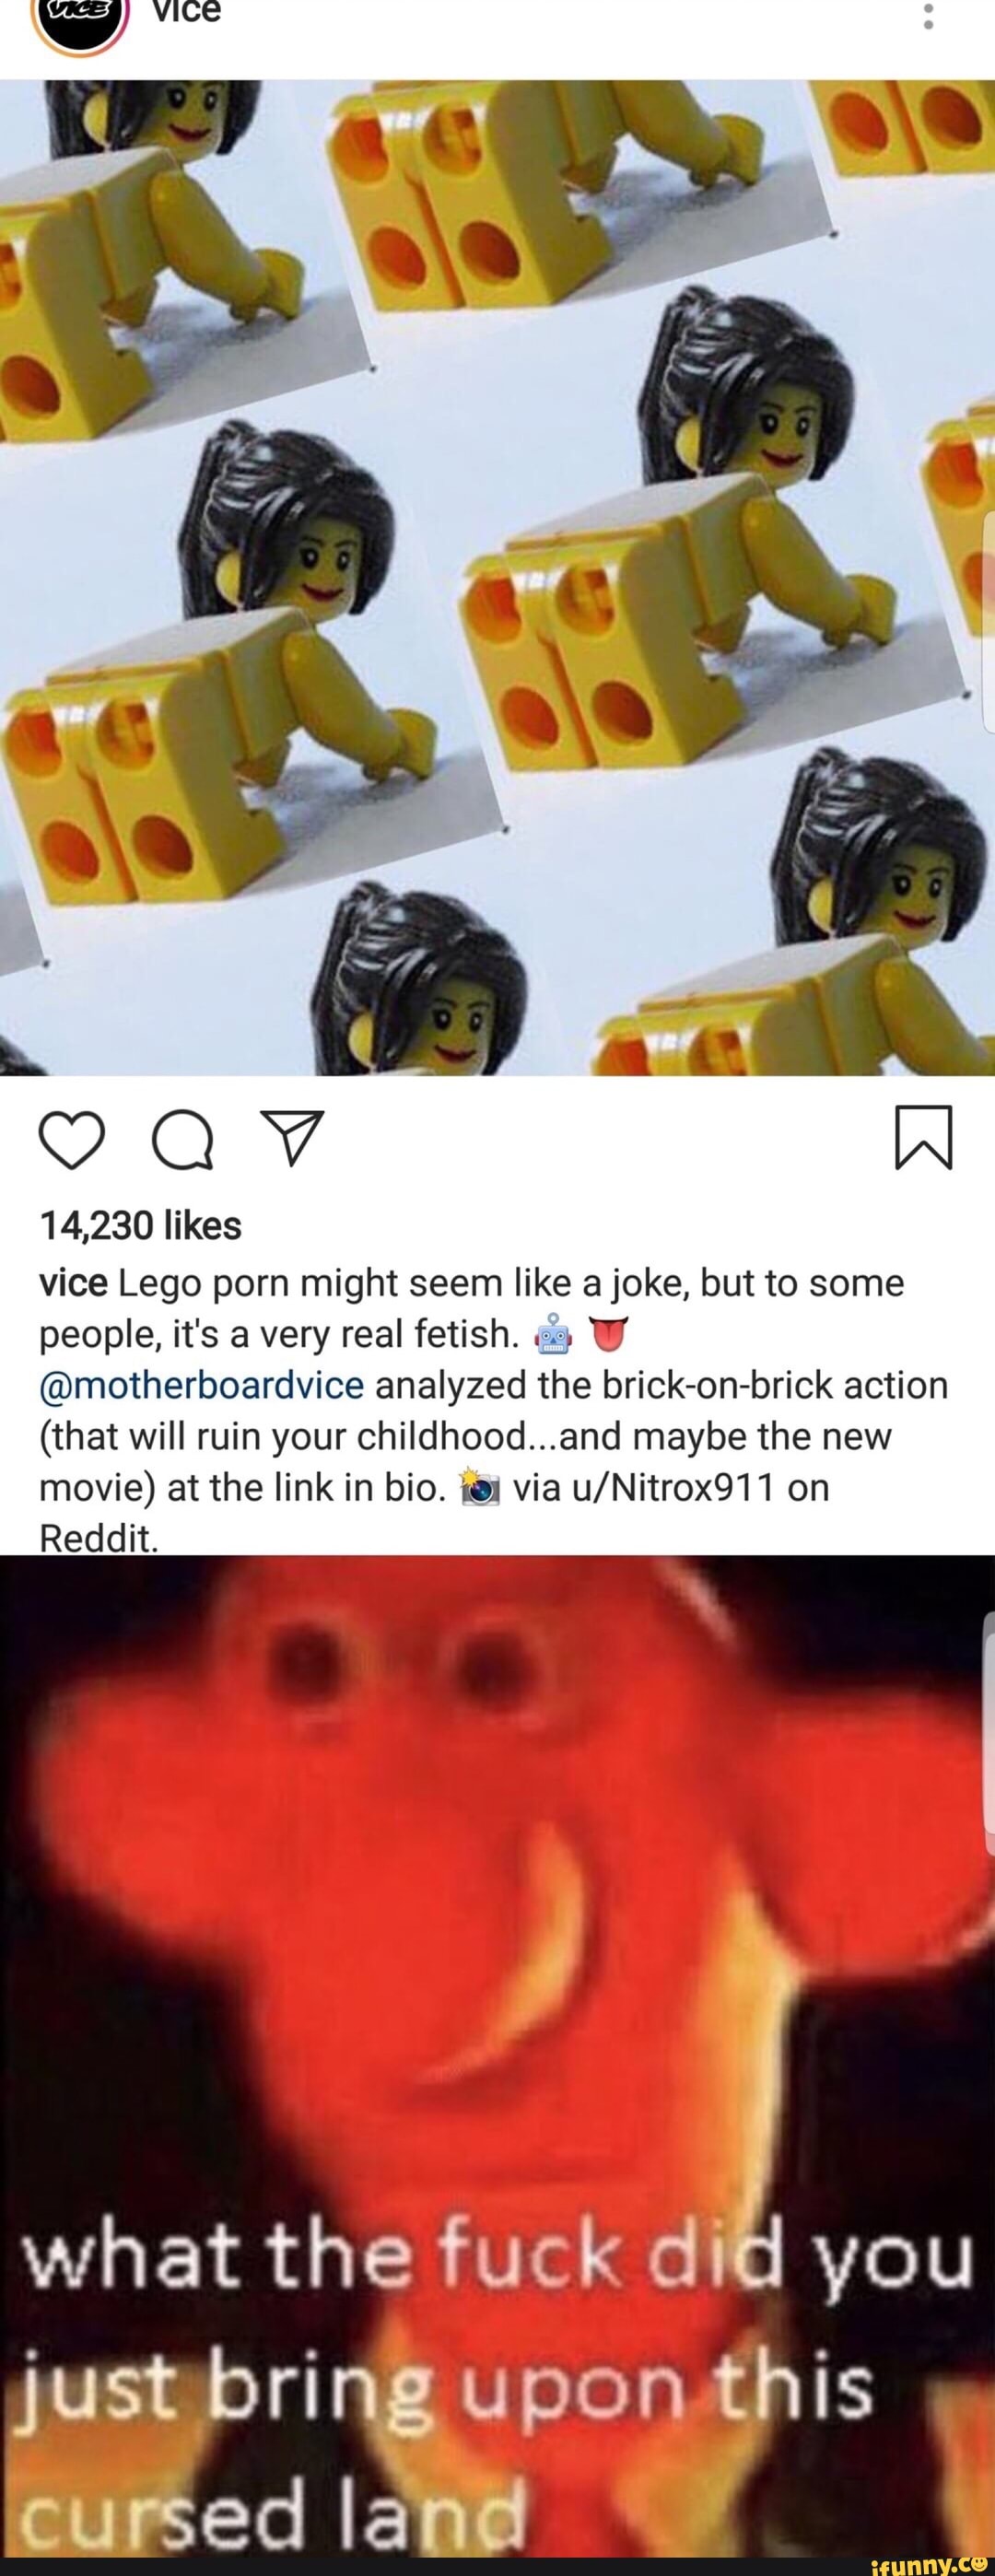 Lego Porn Meme - Vice Lego porn might seem like a joke, but to some people, it's a very real  fetish. .:]. U @motherboardvice analyzed the brick-on-brick action (that  will ruin your childhood...and maybe the new